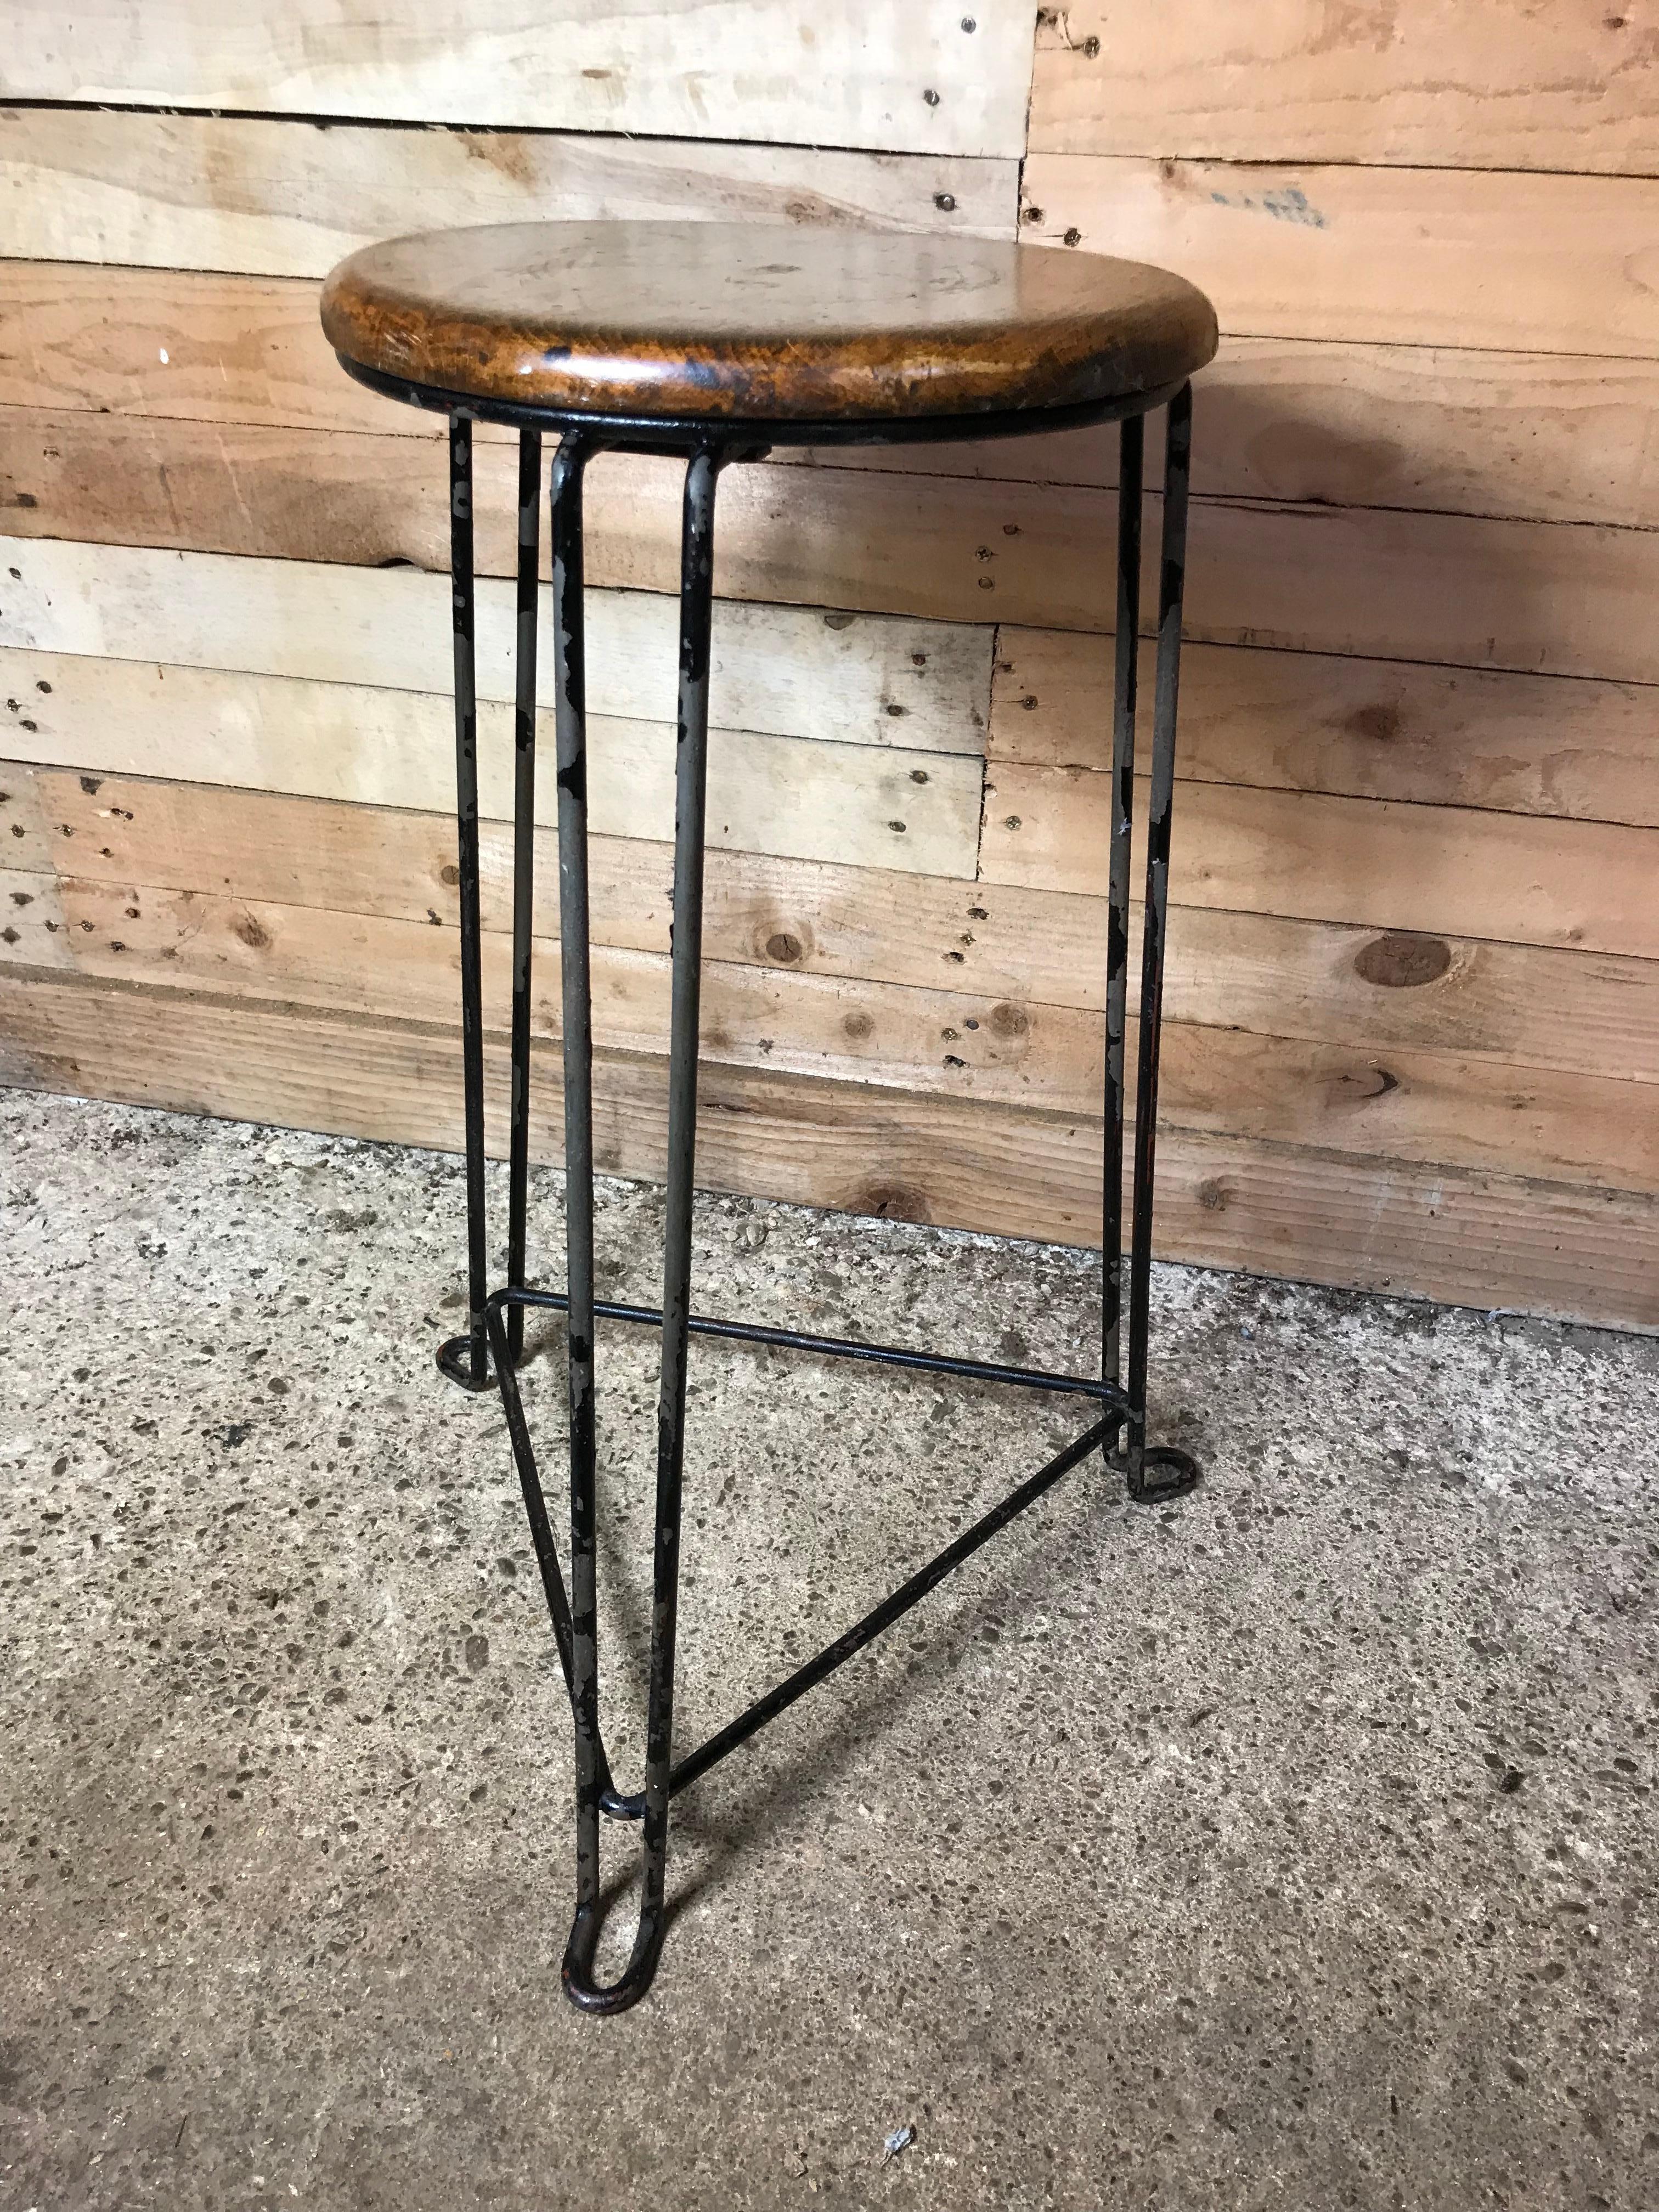 Dutch Retro 1960s Wooden Seat with Metal Frame Tomado Stool, Brown Seat For Sale